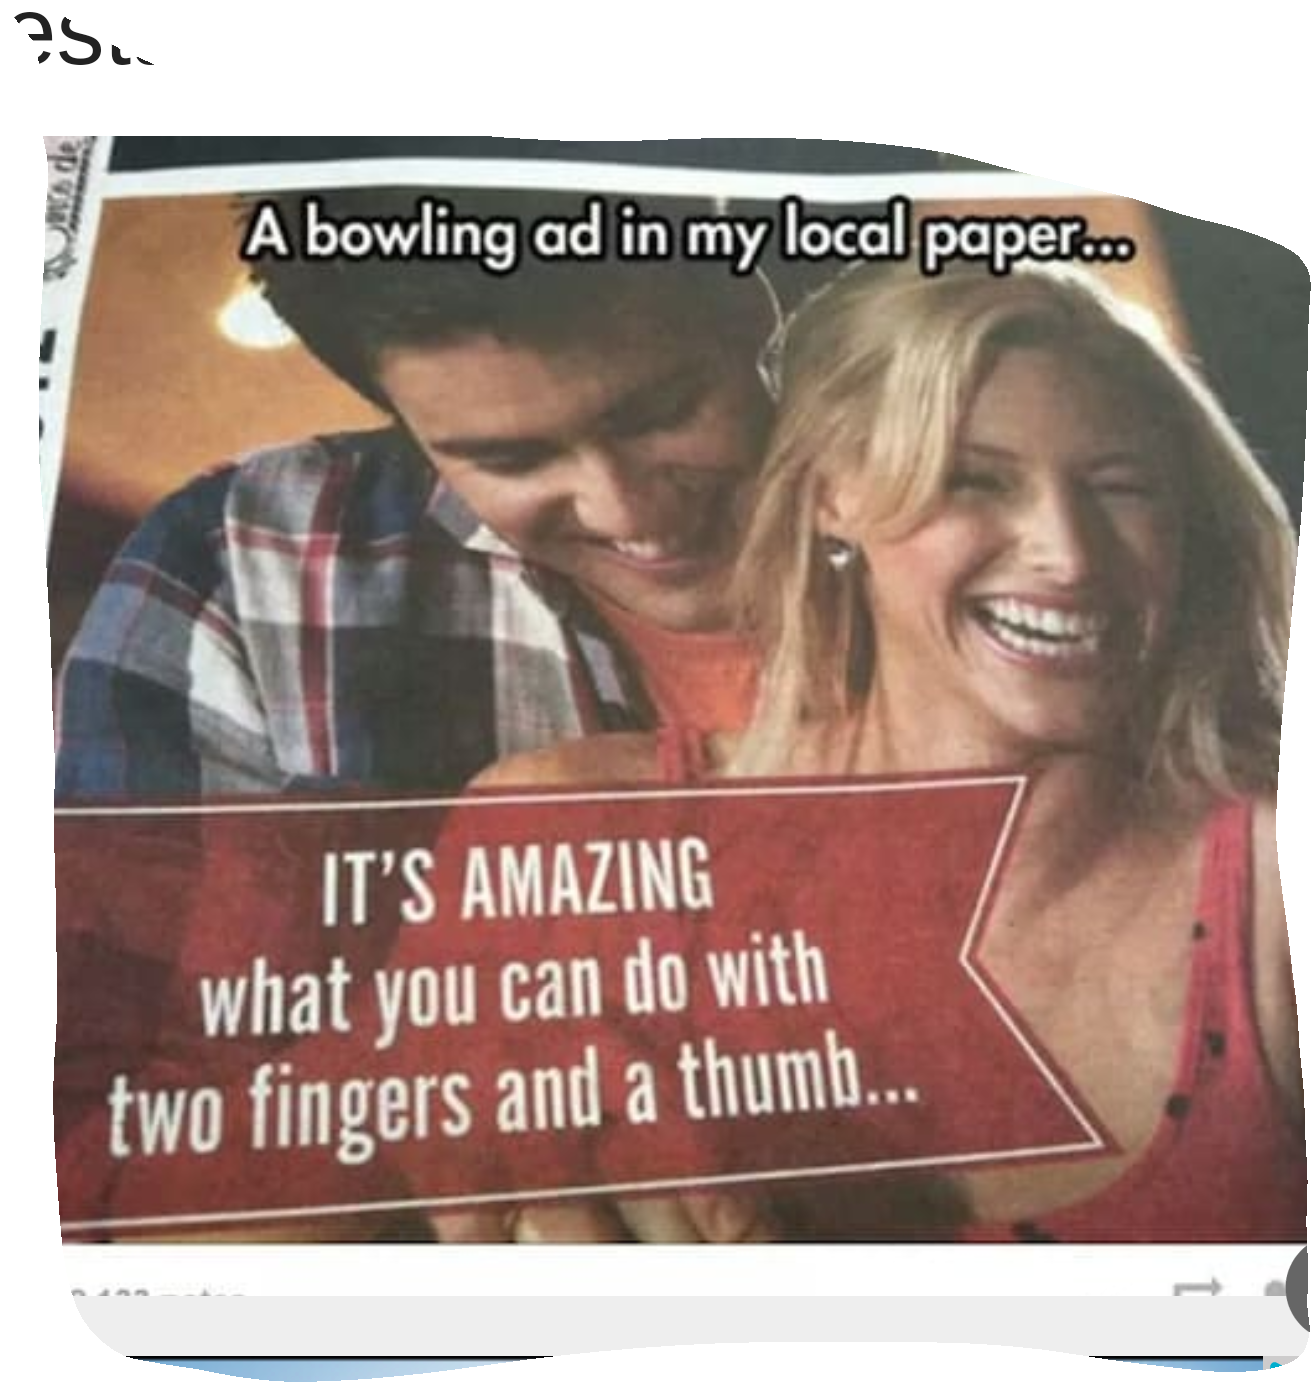 Family friendly bowling alley?